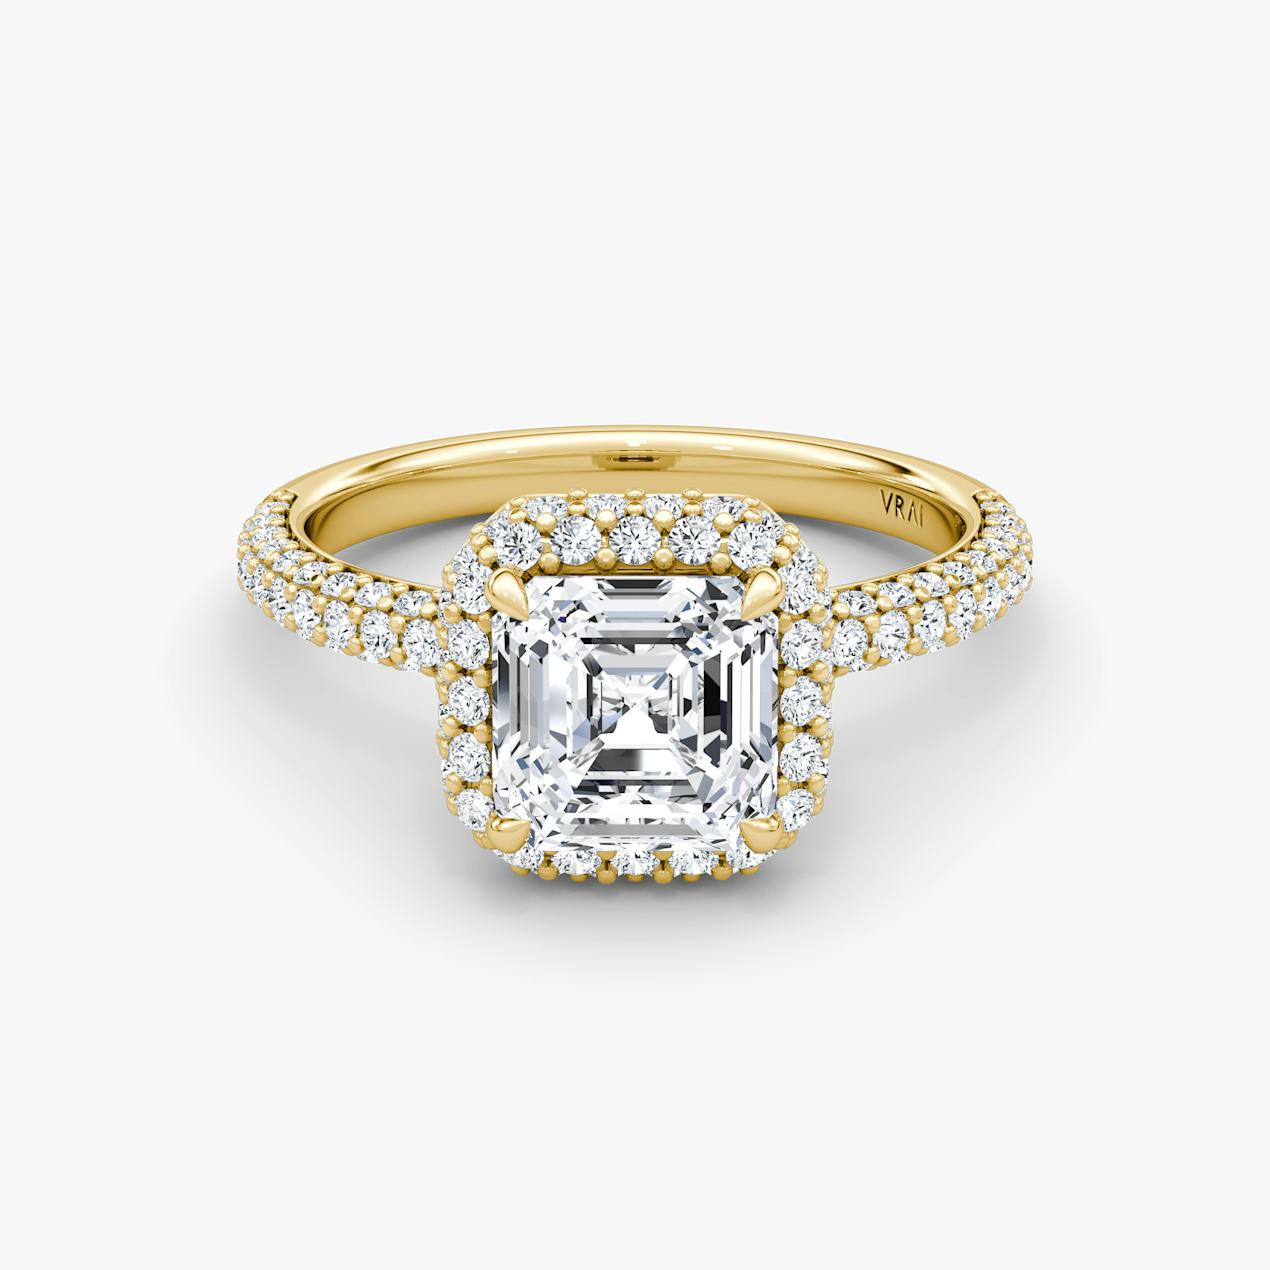 How Many Facets Does an Asscher Diamond Have?